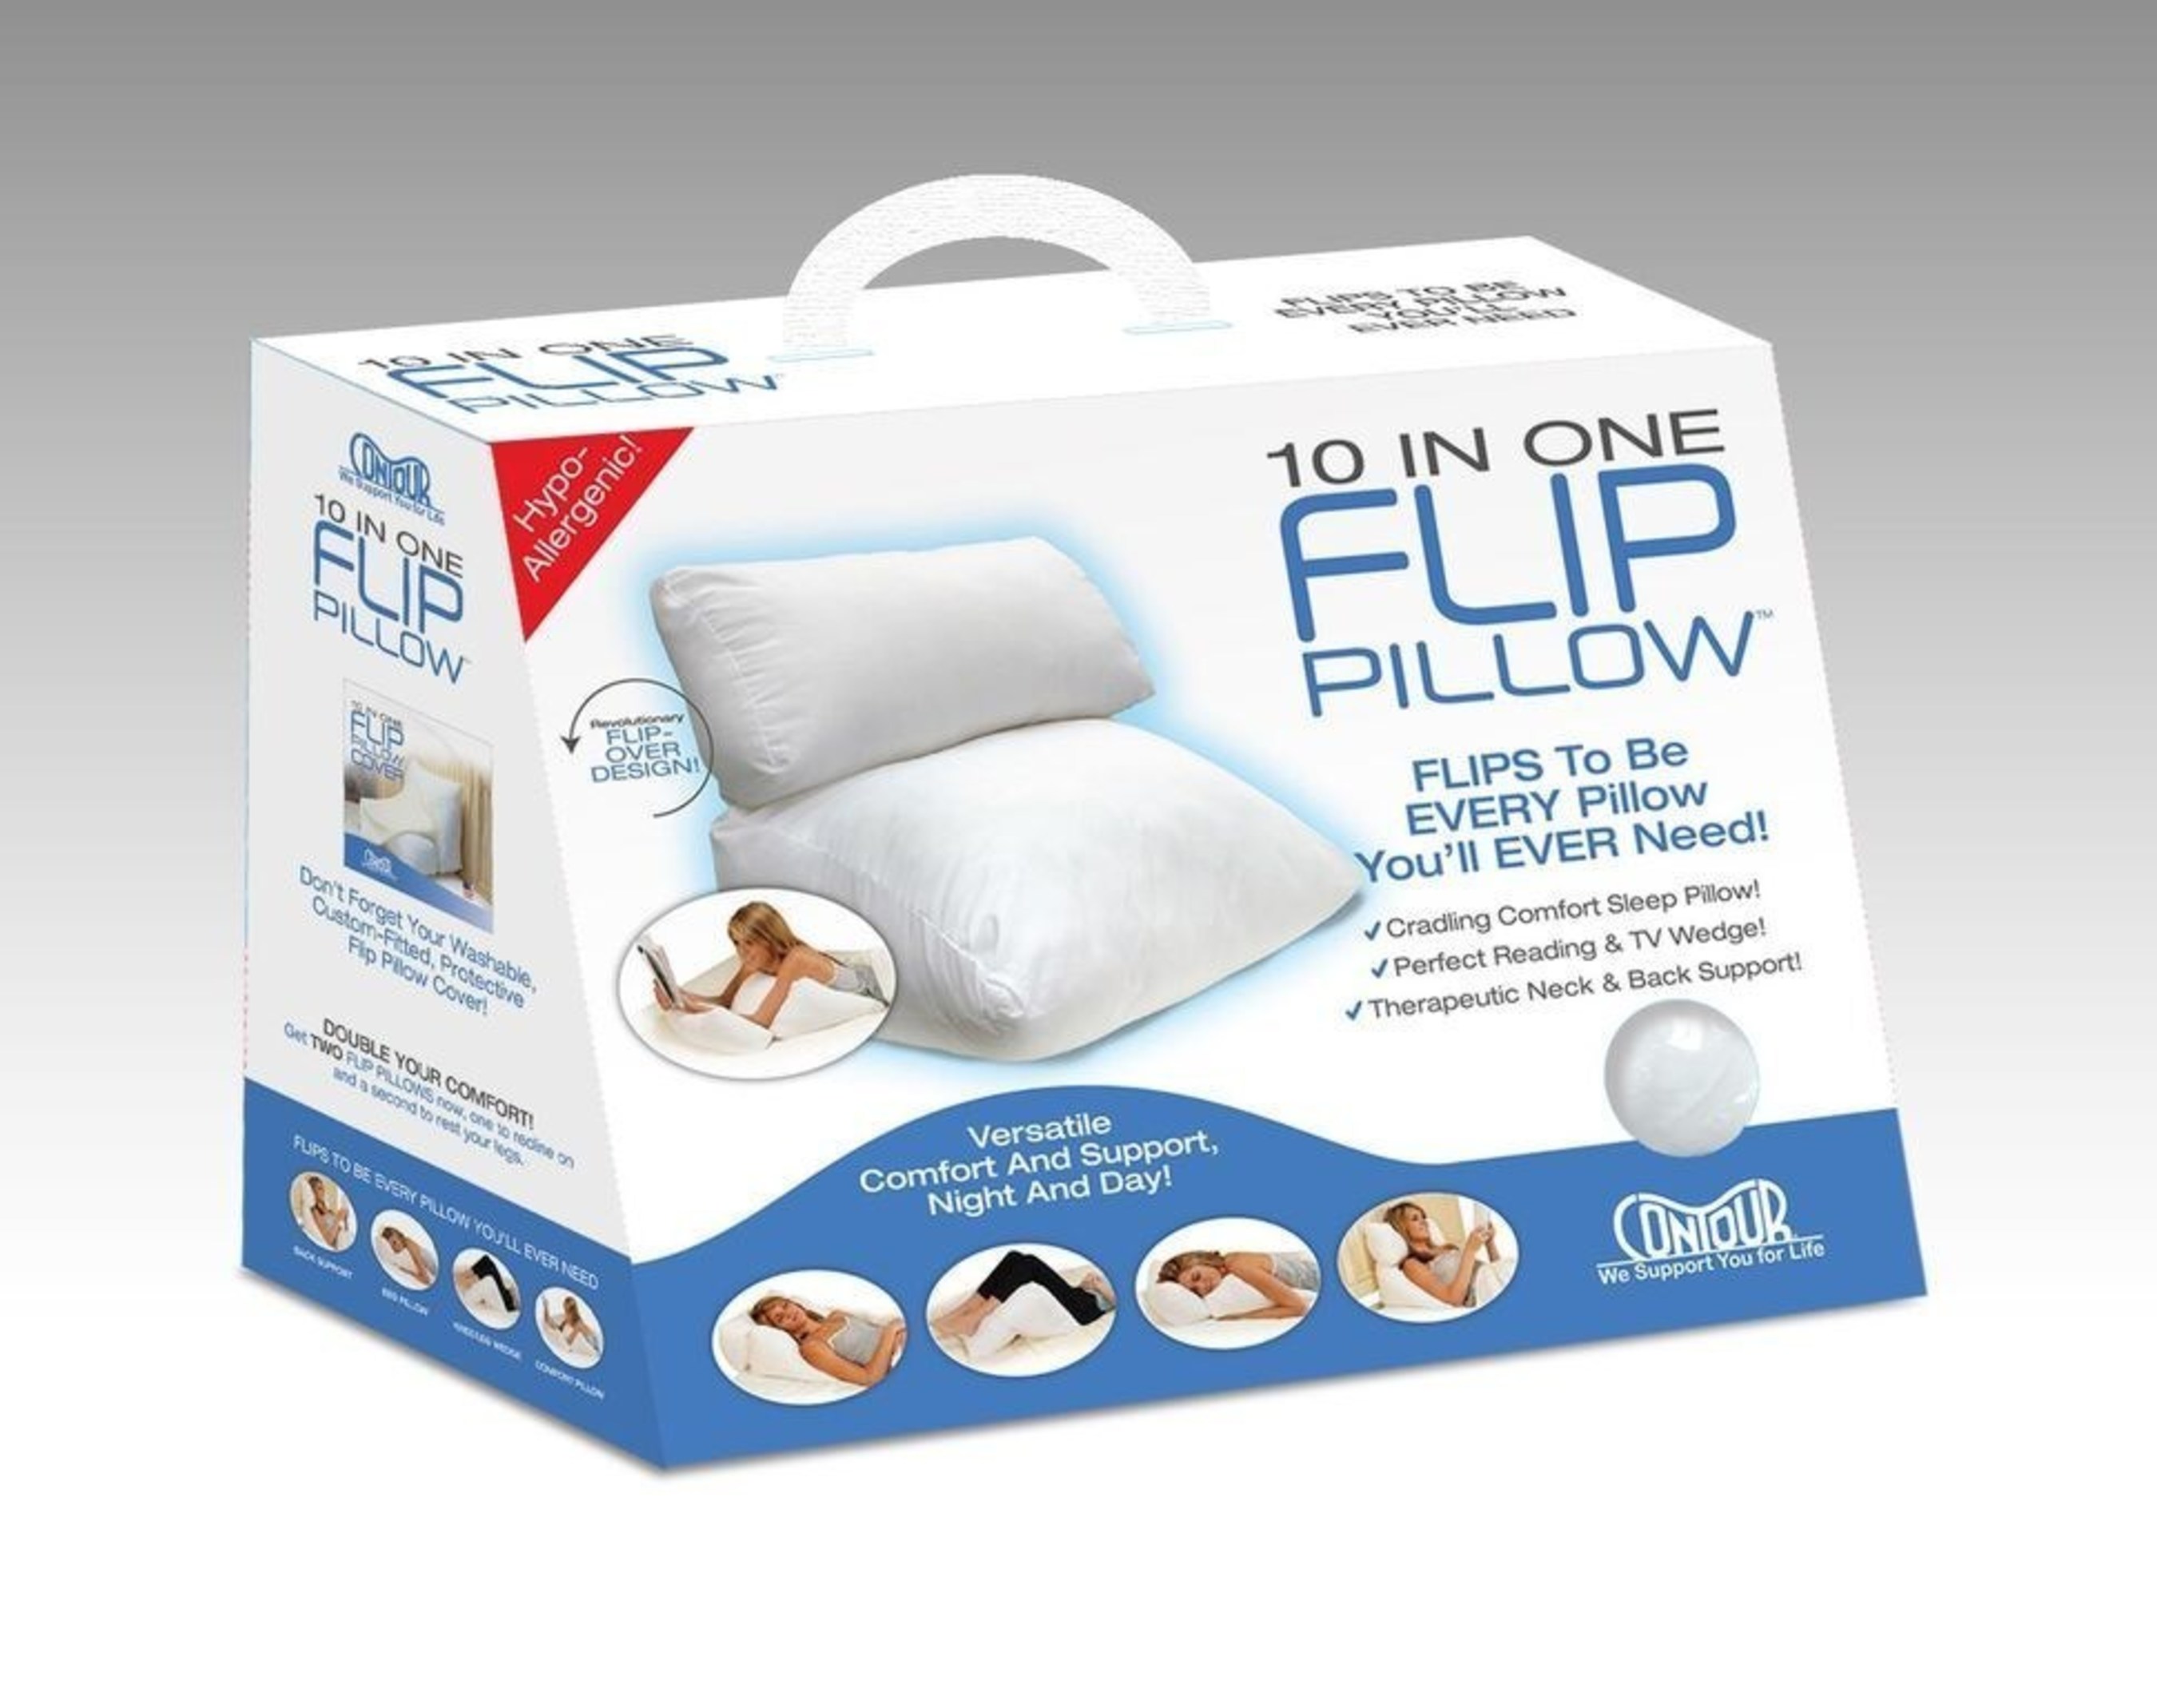 The FLIP PILLOW(TM) is the season's most ideal holiday gift as it provides comfort solutions to any age group. Its 10-in-one design offers the utmost in pillow comfort while also providing therapeutic wedge support. It gently supports the back while sitting up, soothes the lumbar while working at a desk and cradles the elbows while reading on your stomach. At night, it lets side and stomach sleepers rest without neck strain, elevates the torso for easier breathing or digestion, props up knees to ease sore back muscles or raises the feet.